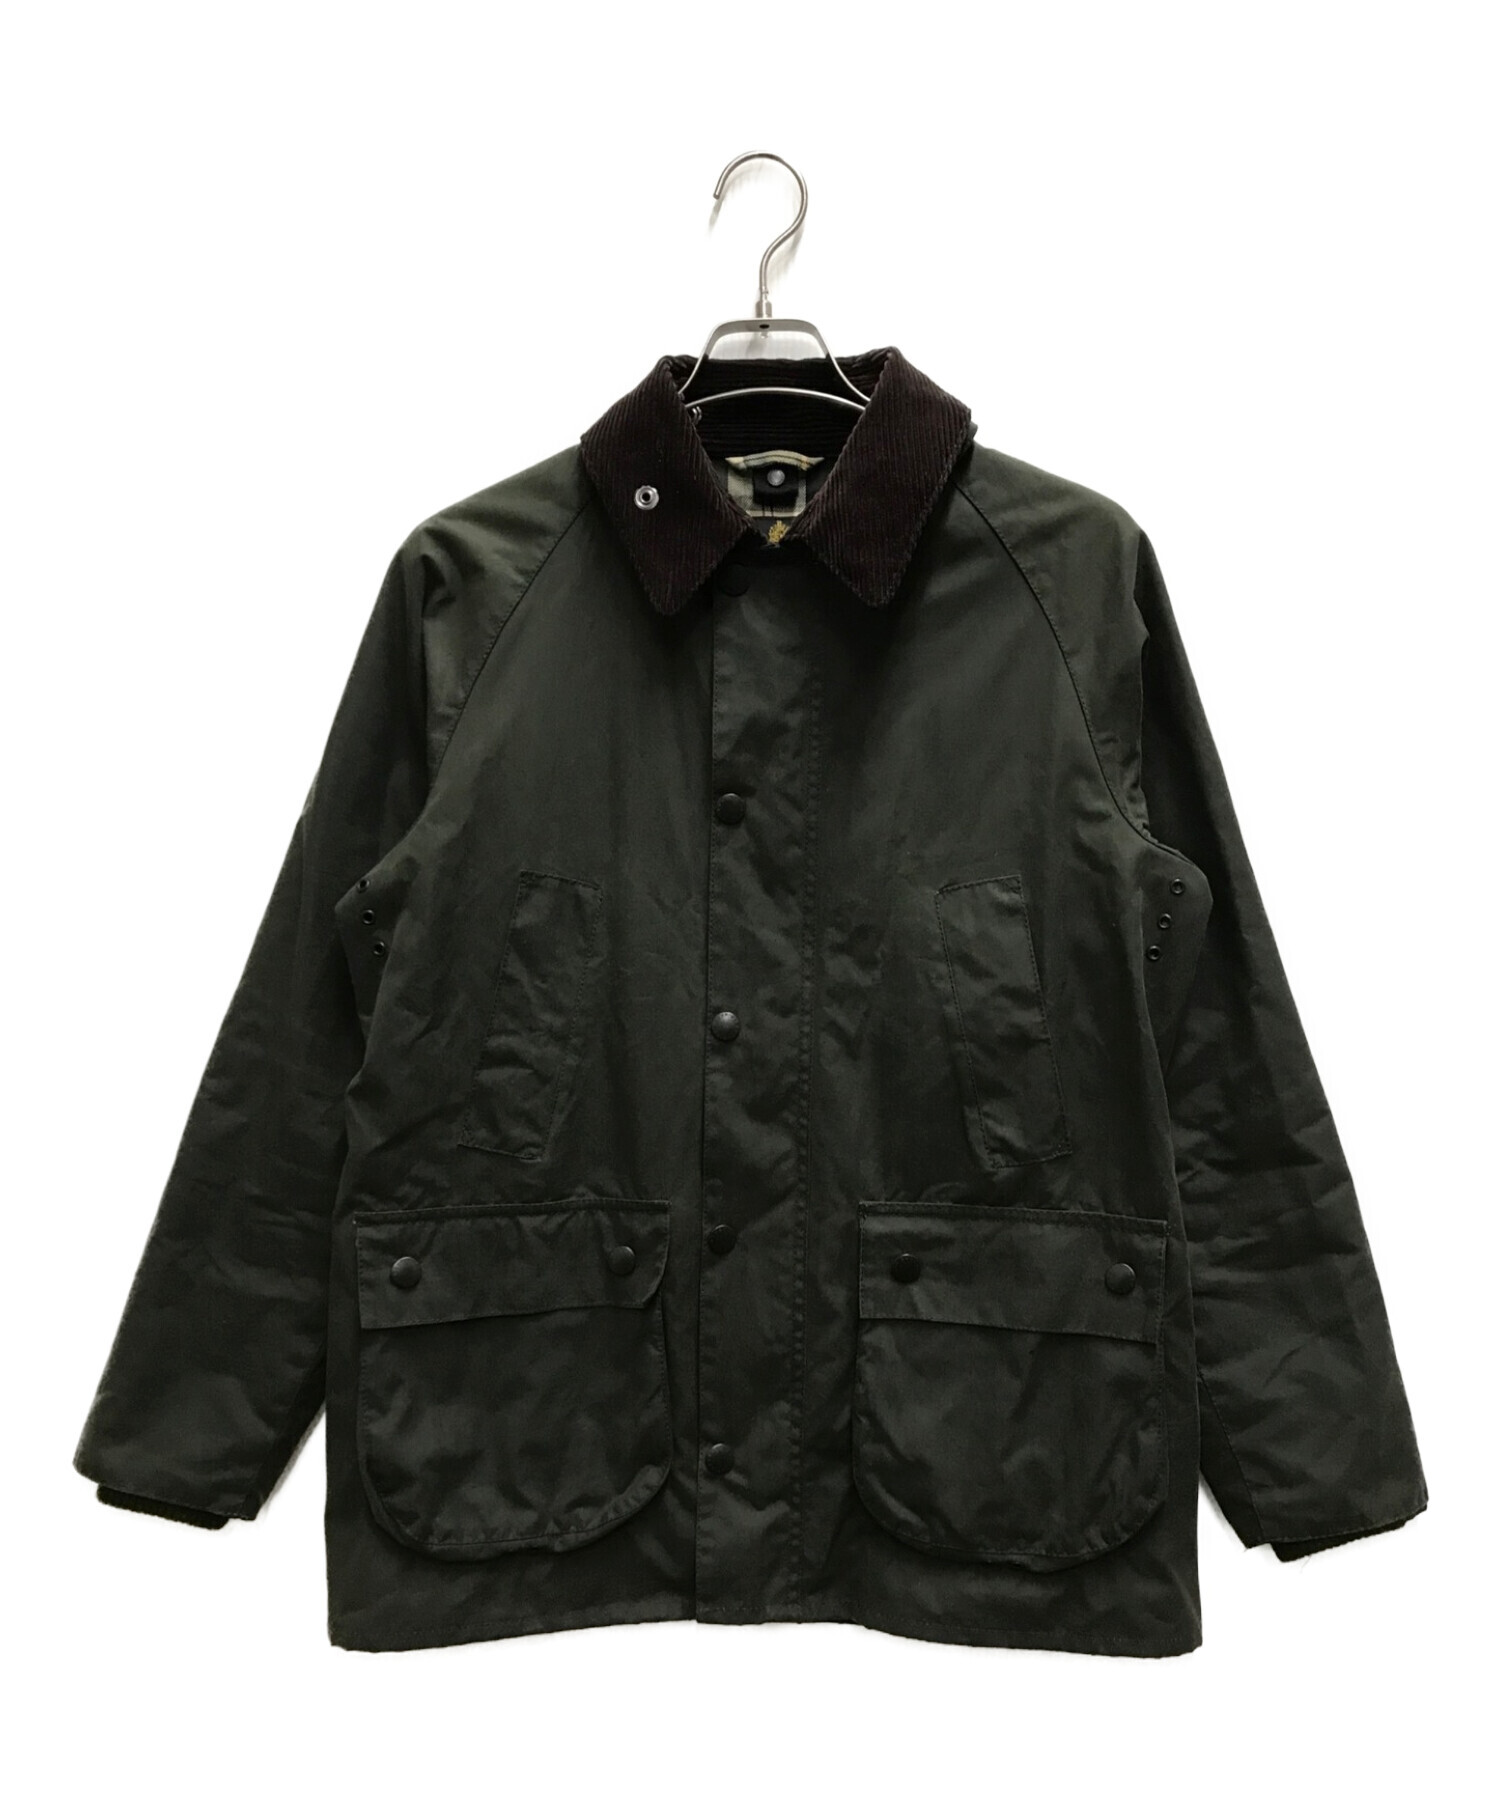 Barbour | BEDALE オイルドジャケット black size38 - ブルゾン